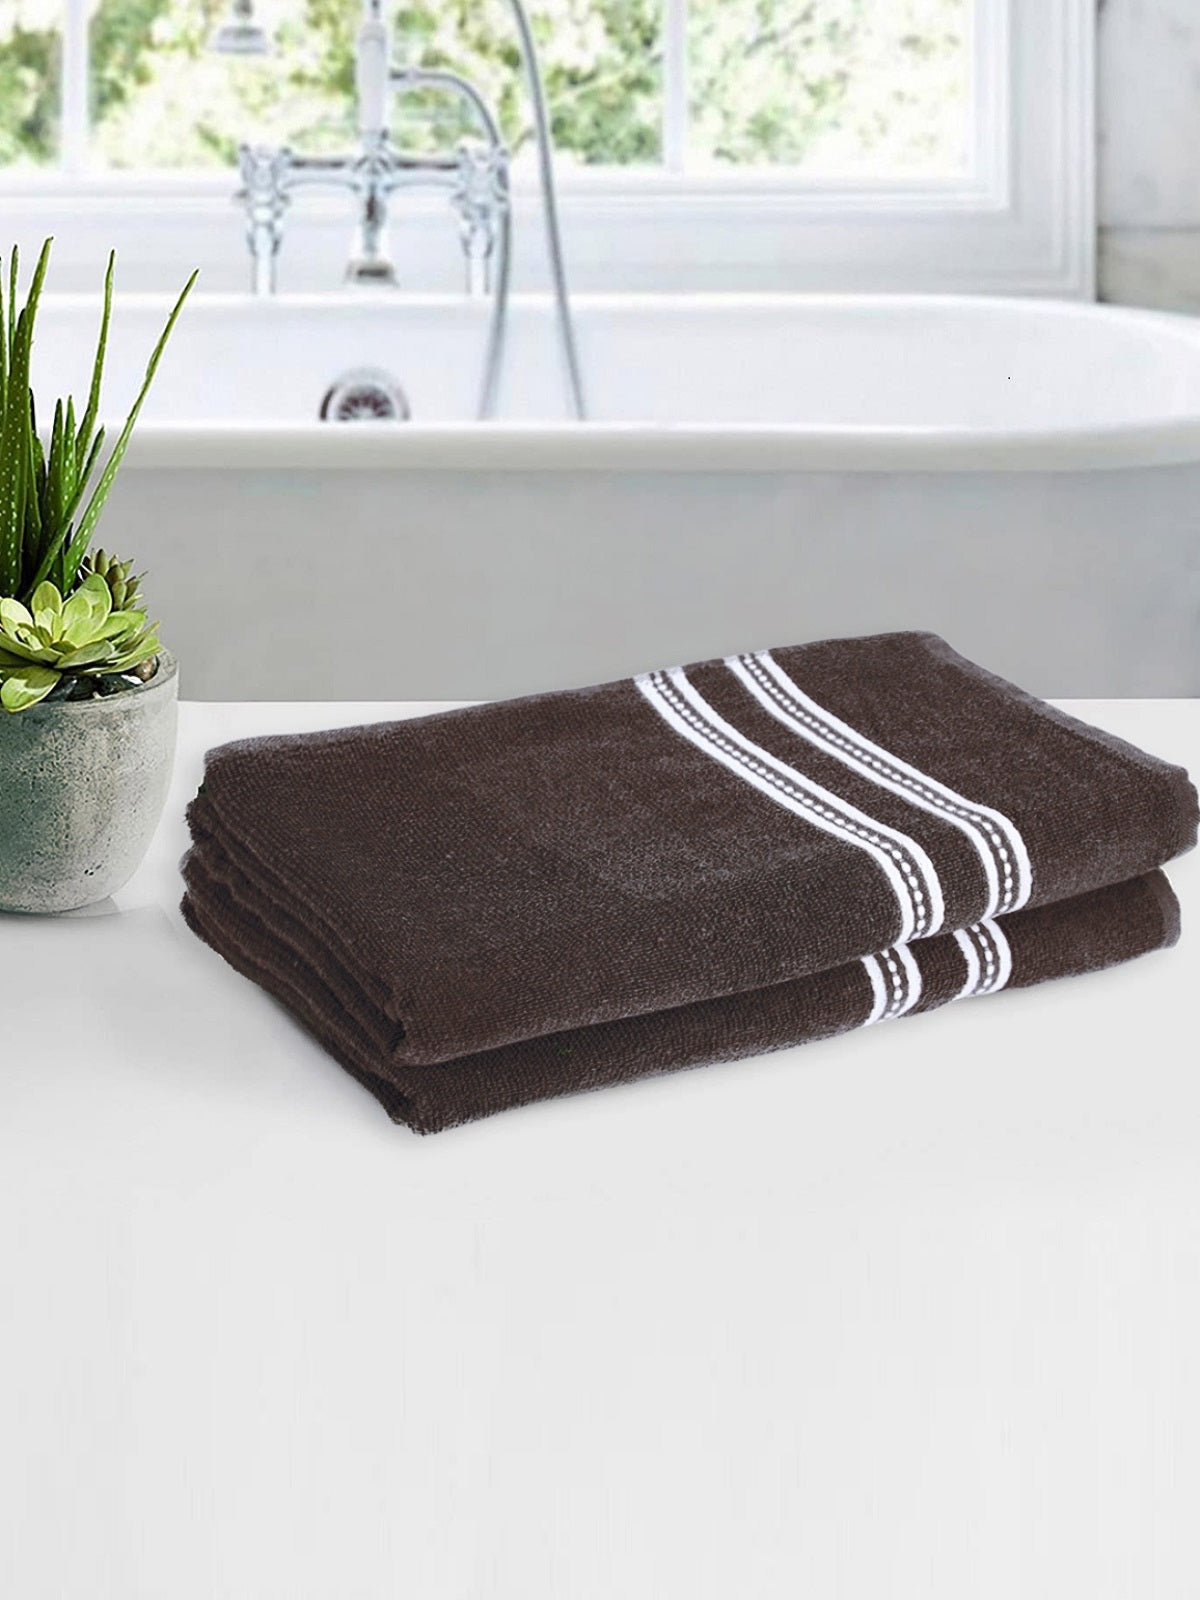 Set of 2 Coffee Brown Solid Cotton Towels